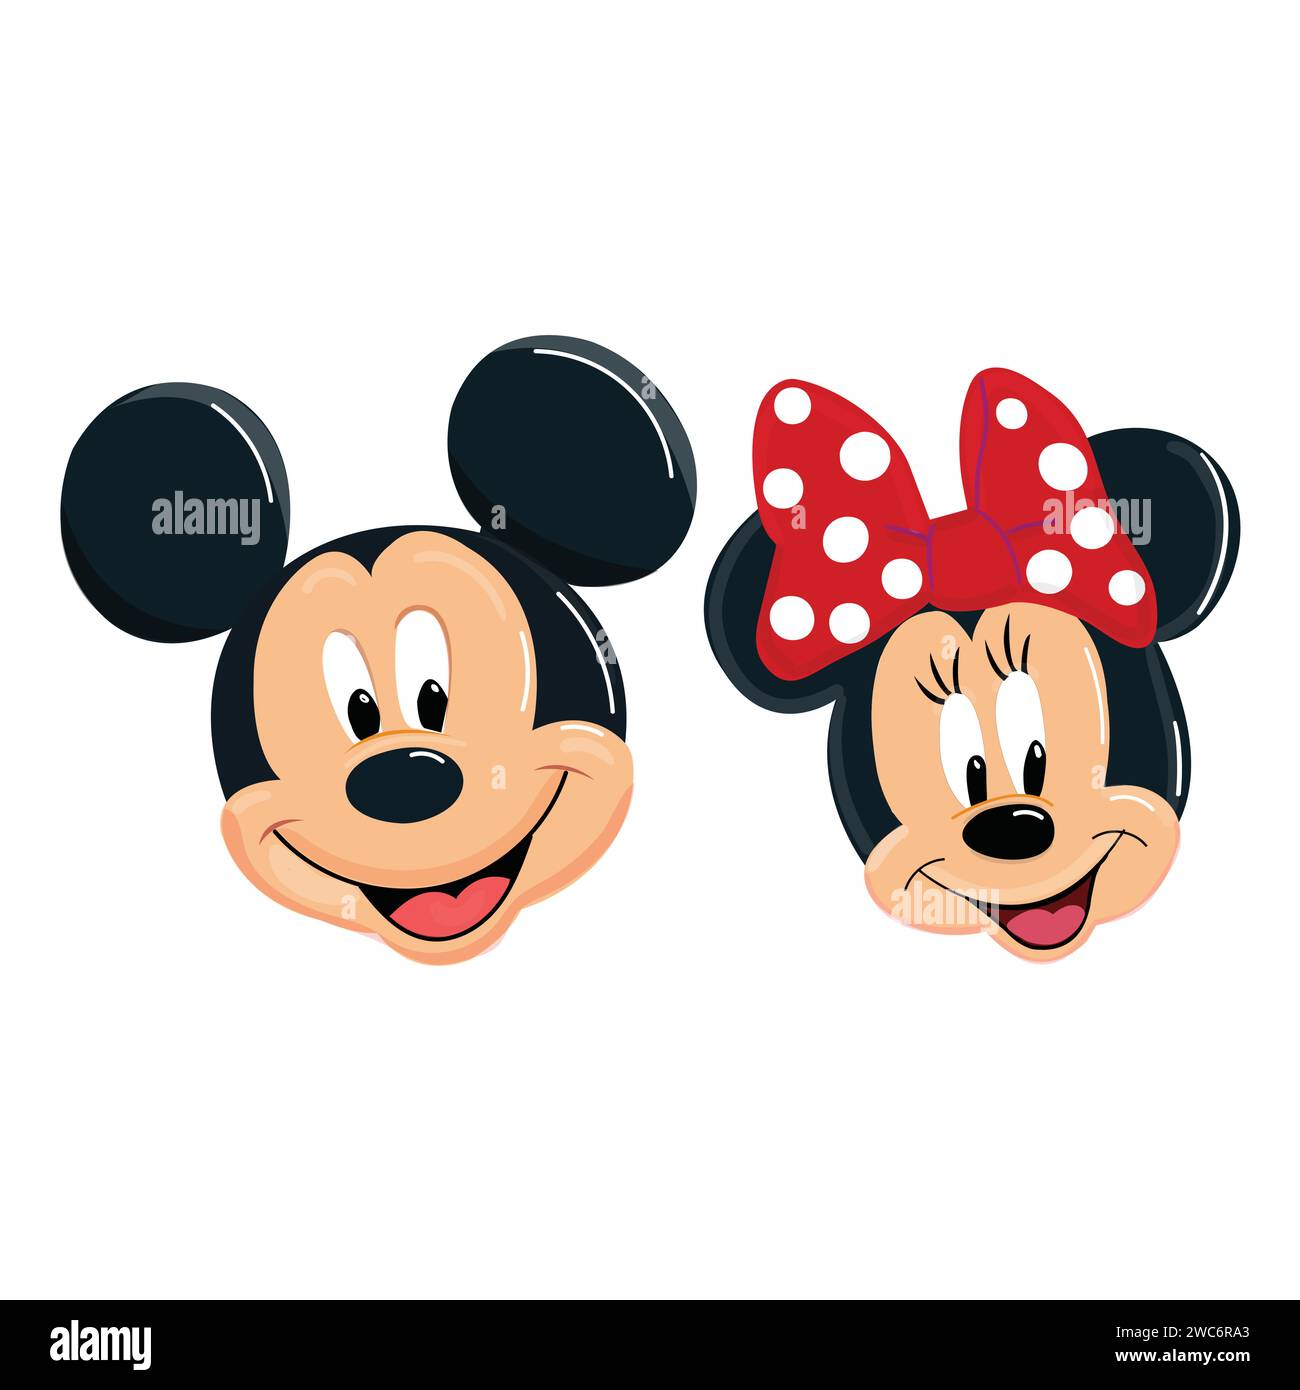 Disney Vector Illustration of Minnie Mouse Isolated on White